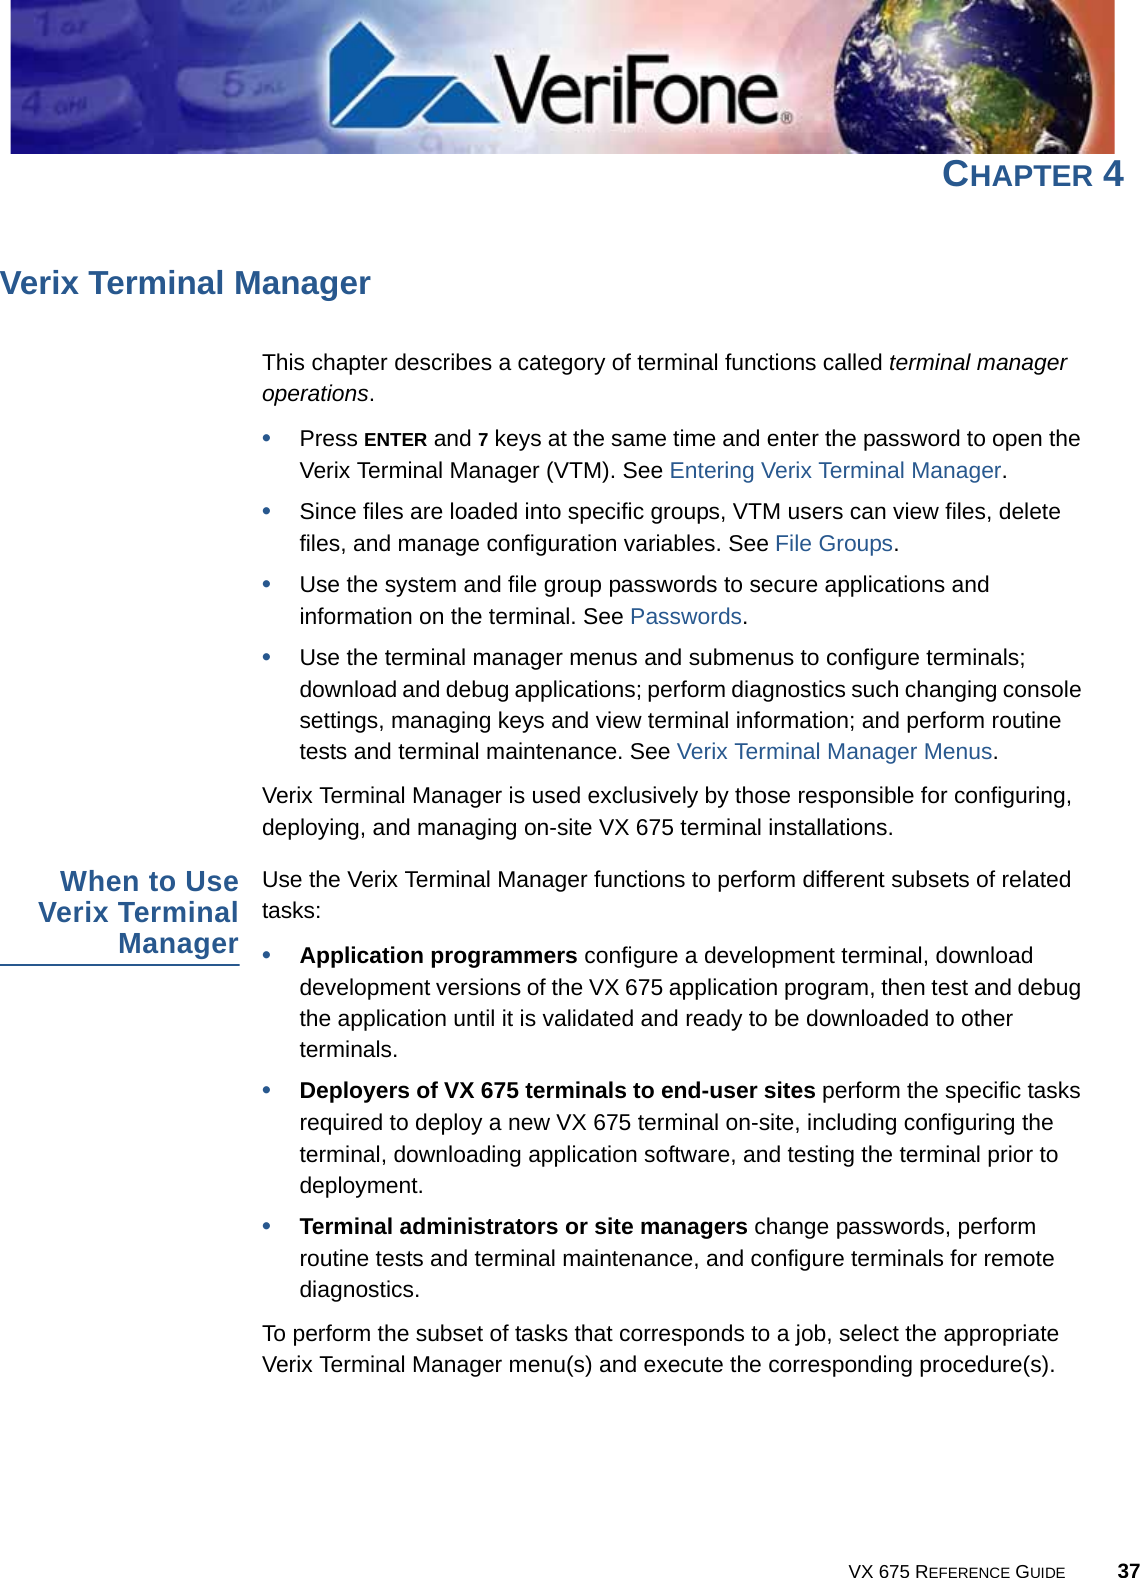 VX 675 REFERENCE GUIDE 37CHAPTER 4Verix Terminal ManagerThis chapter describes a category of terminal functions called terminal manager operations.•Press ENTER and 7 keys at the same time and enter the password to open the Verix Terminal Manager (VTM). See Entering Verix Terminal Manager.•Since files are loaded into specific groups, VTM users can view files, delete files, and manage configuration variables. See File Groups.•Use the system and file group passwords to secure applications and information on the terminal. See Passwords.•Use the terminal manager menus and submenus to configure terminals; download and debug applications; perform diagnostics such changing console settings, managing keys and view terminal information; and perform routine tests and terminal maintenance. See Verix Terminal Manager Menus.Verix Terminal Manager is used exclusively by those responsible for configuring, deploying, and managing on-site VX 675 terminal installations.When to UseVerix TerminalManagerUse the Verix Terminal Manager functions to perform different subsets of related tasks:•Application programmers configure a development terminal, download development versions of the VX 675 application program, then test and debug the application until it is validated and ready to be downloaded to other terminals.•Deployers of VX 675 terminals to end-user sites perform the specific tasks required to deploy a new VX 675 terminal on-site, including configuring the terminal, downloading application software, and testing the terminal prior to deployment.•Terminal administrators or site managers change passwords, perform routine tests and terminal maintenance, and configure terminals for remote diagnostics.To perform the subset of tasks that corresponds to a job, select the appropriate Verix Terminal Manager menu(s) and execute the corresponding procedure(s).